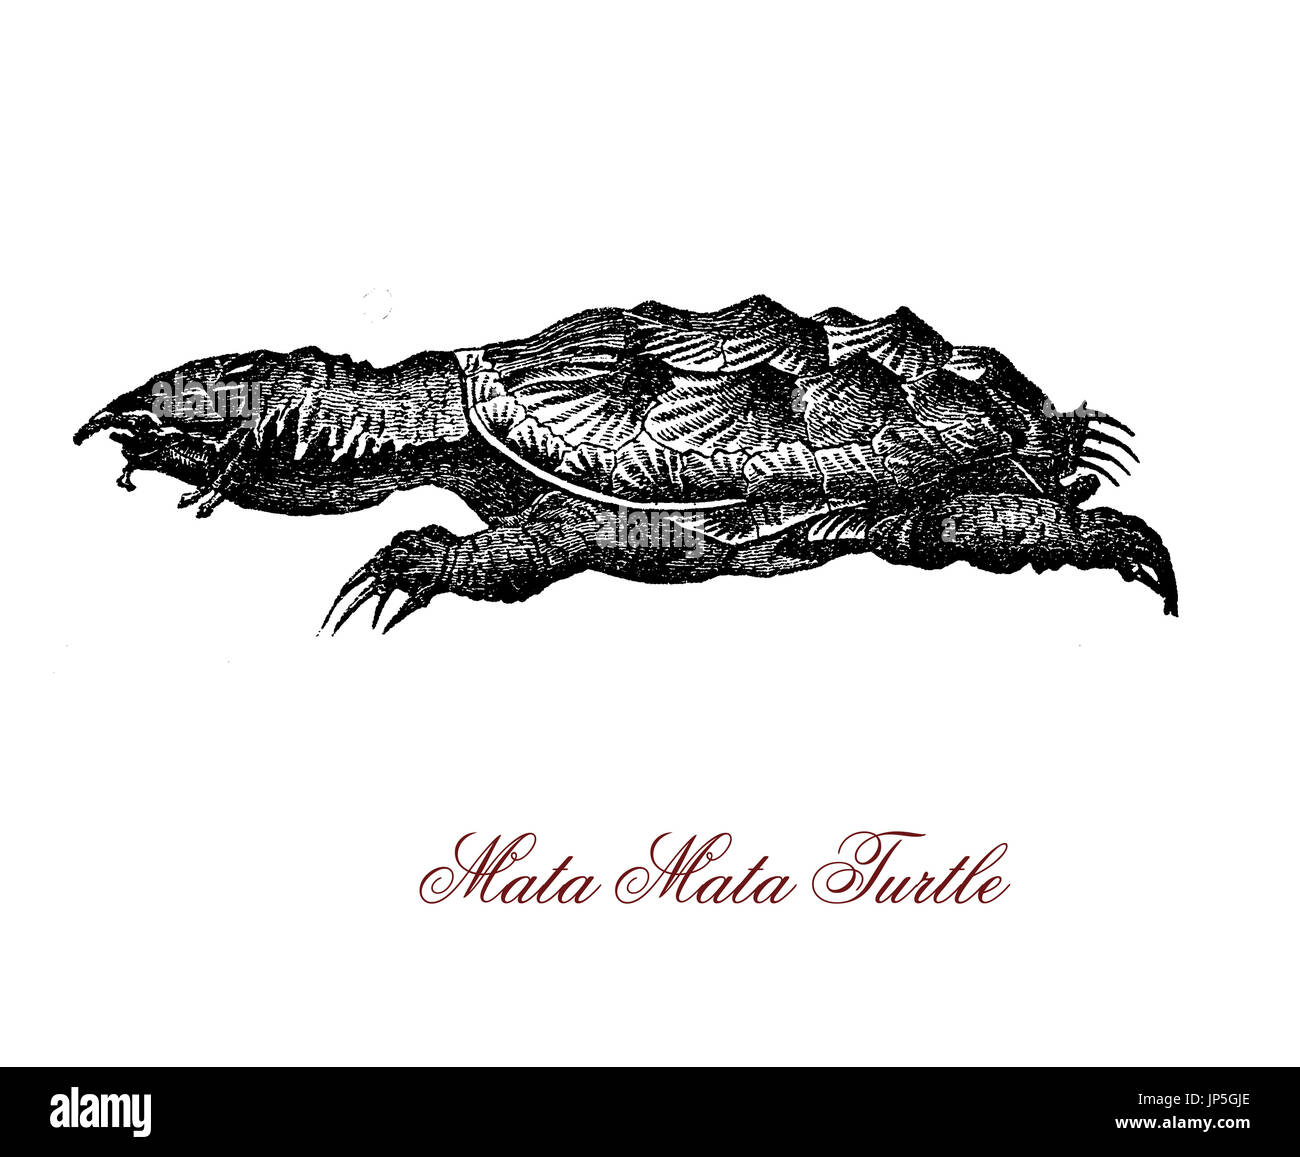 Vintage portrait of mata mata turtle,freshwater brown and black turtle of South America great water basins with spiky and ridged scales and a horn on its snout to breathe in water Stock Photo